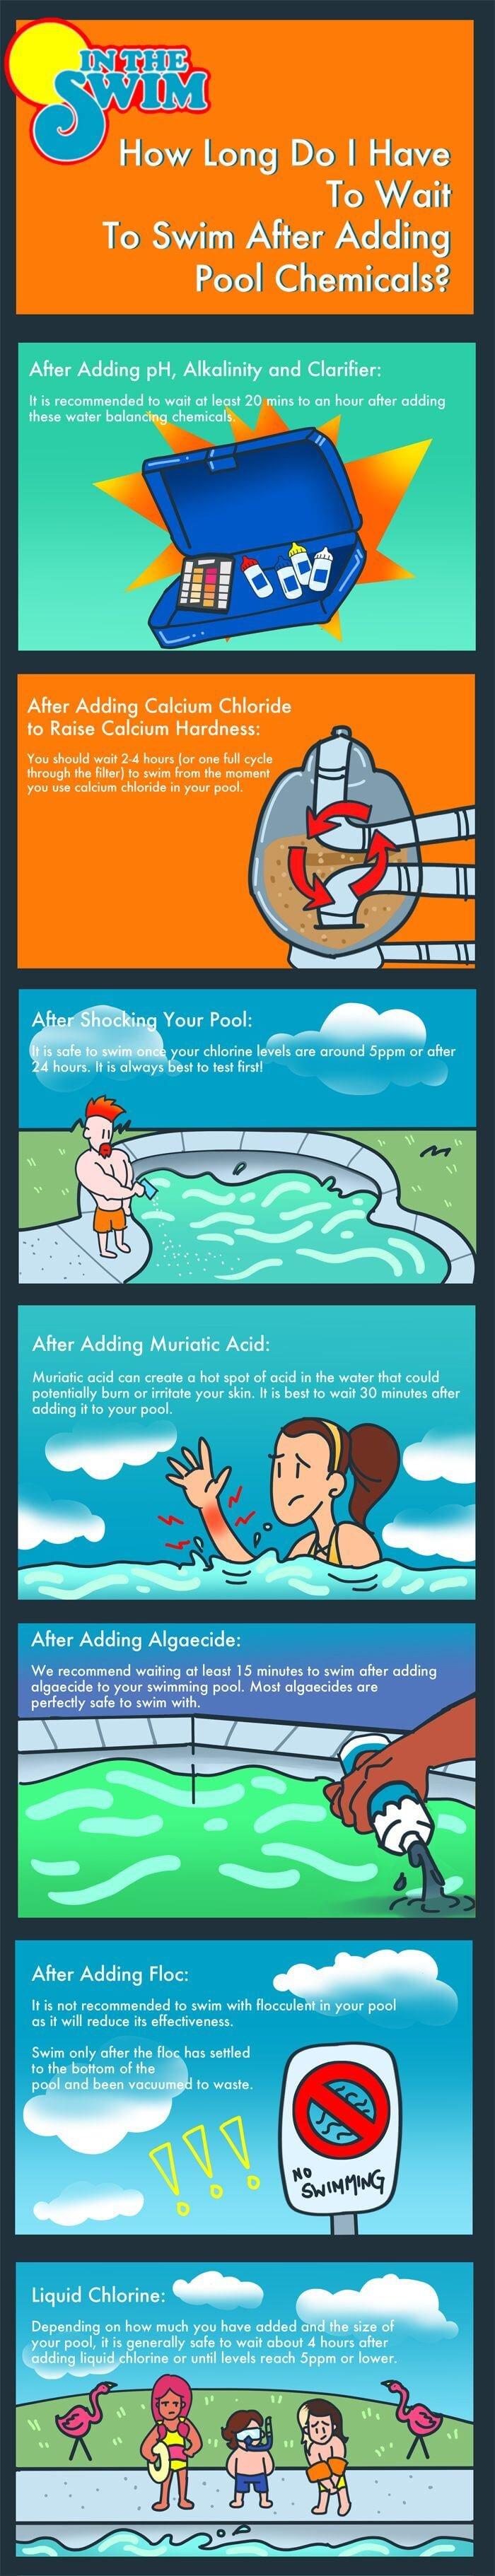 How Long After Adding Muriatic Acid Can You Swim?